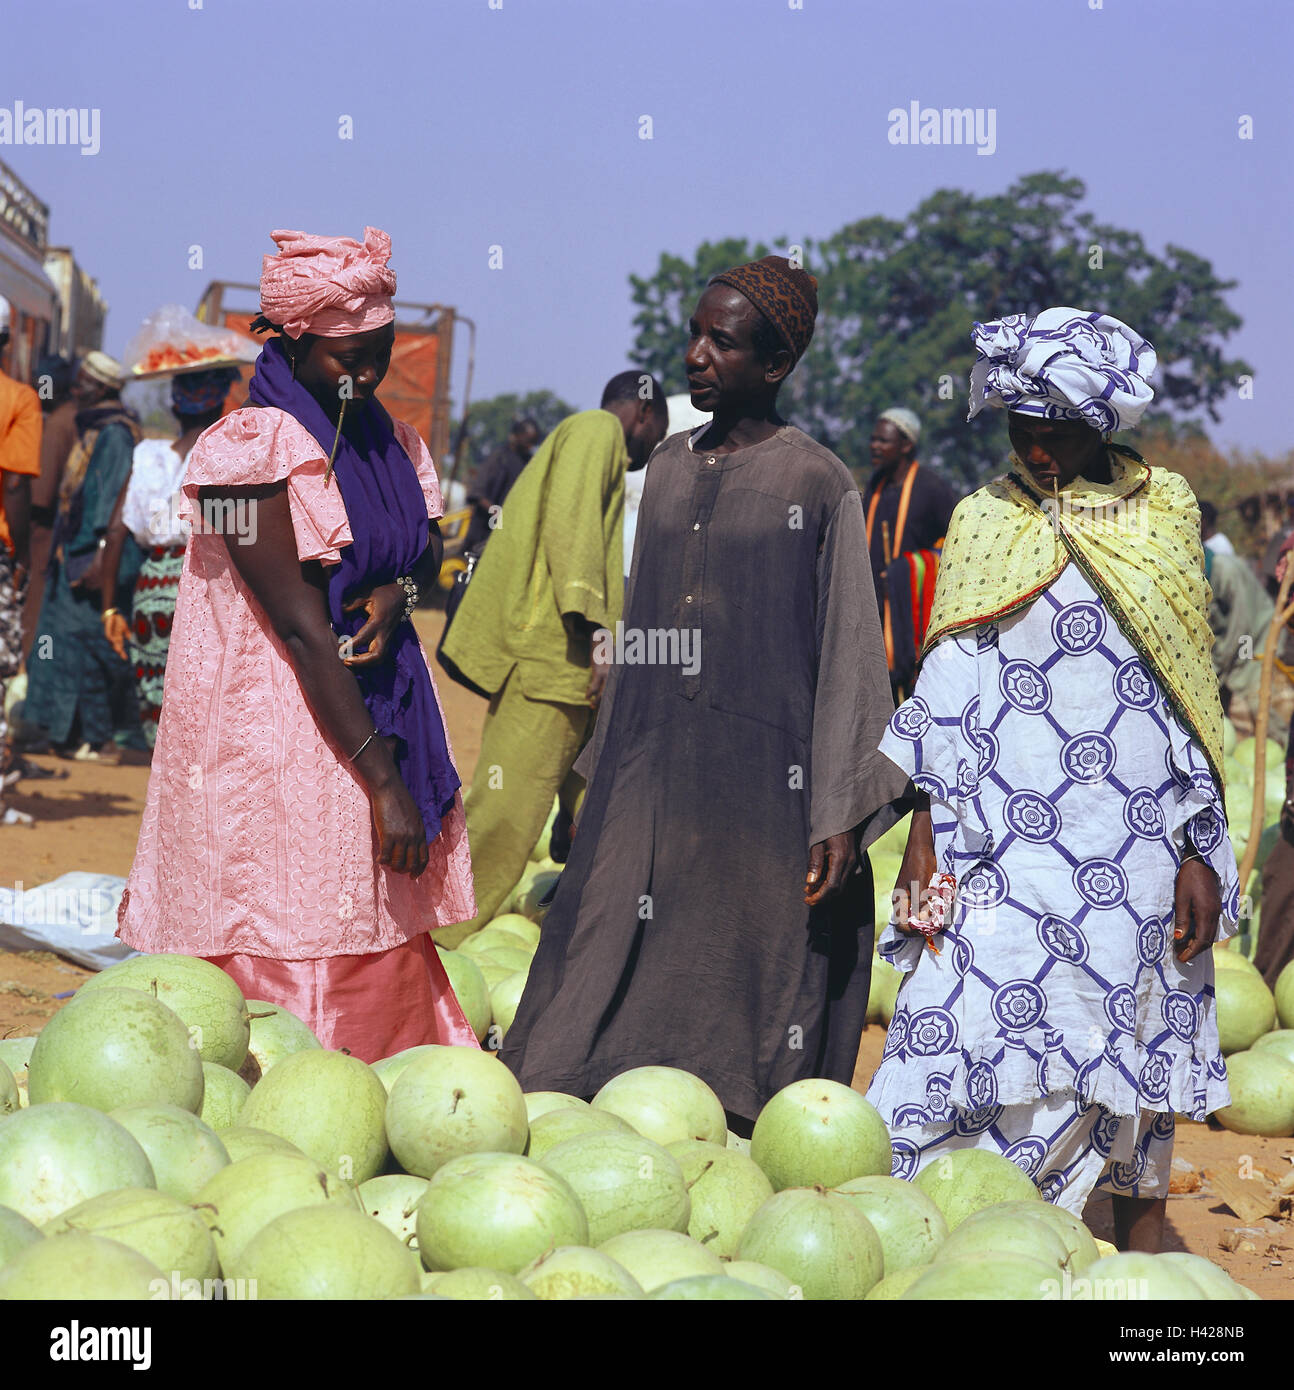 Senegal, Kaolack, market scene, Africa, West Africa, economy, trade, sales, market, market beating out, women, man, person, Senegalese, swarthy, clothes, traditionally, headscarfs, dealers, customers, fruits, fruit, watermelons, melons, outside, Stock Photo